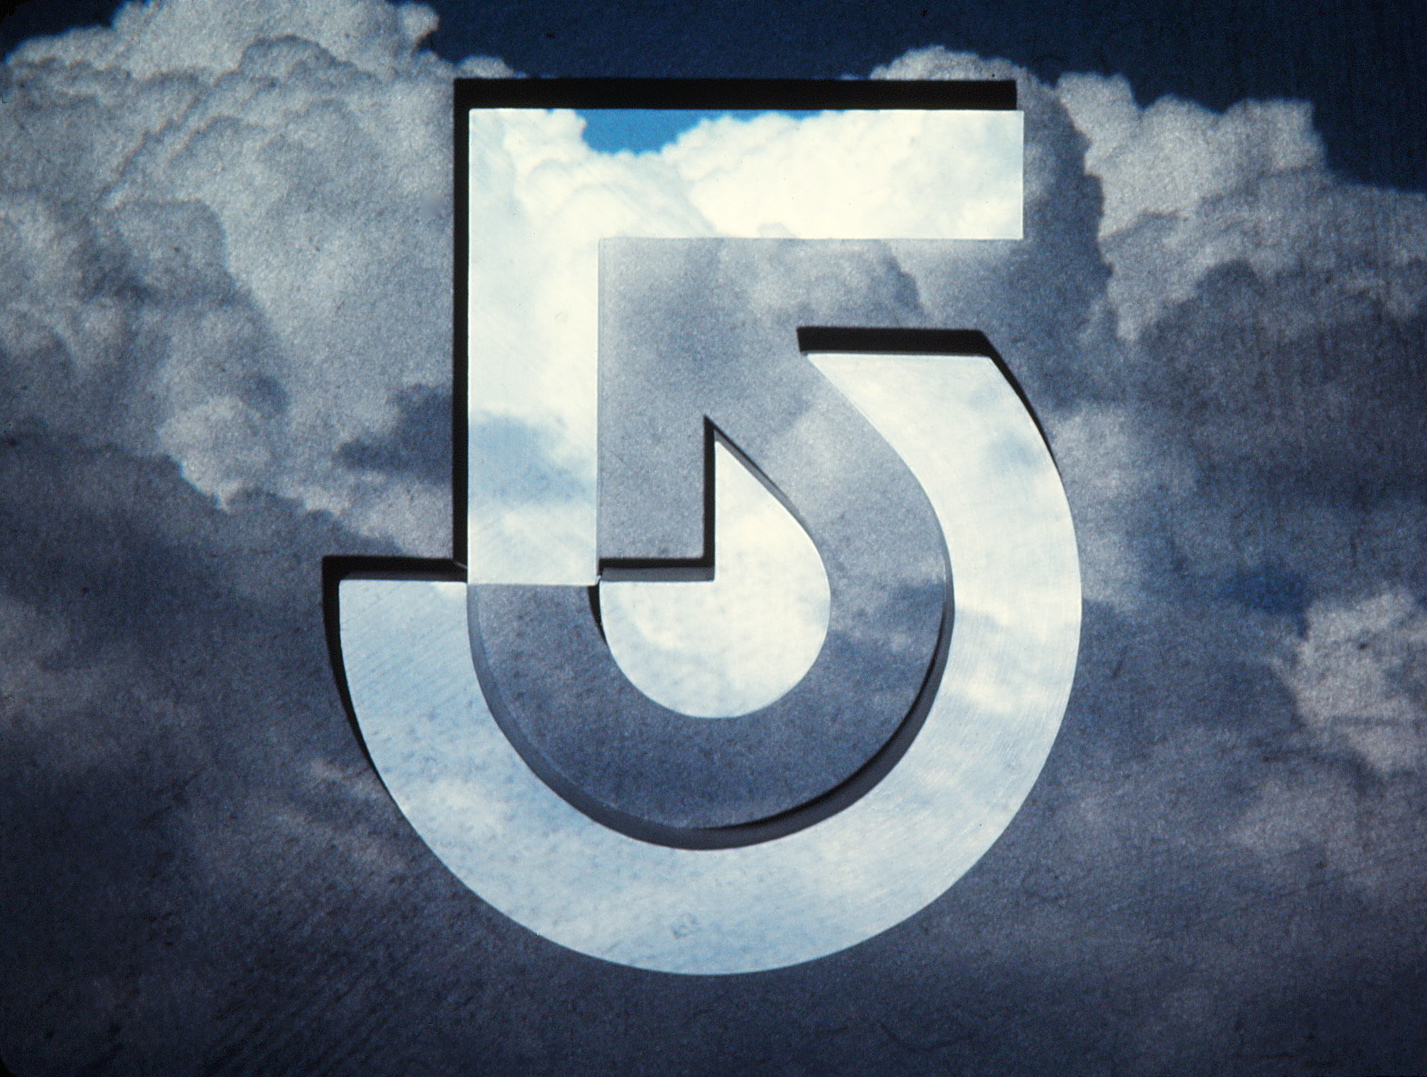 Channel 5 logo with clouds background